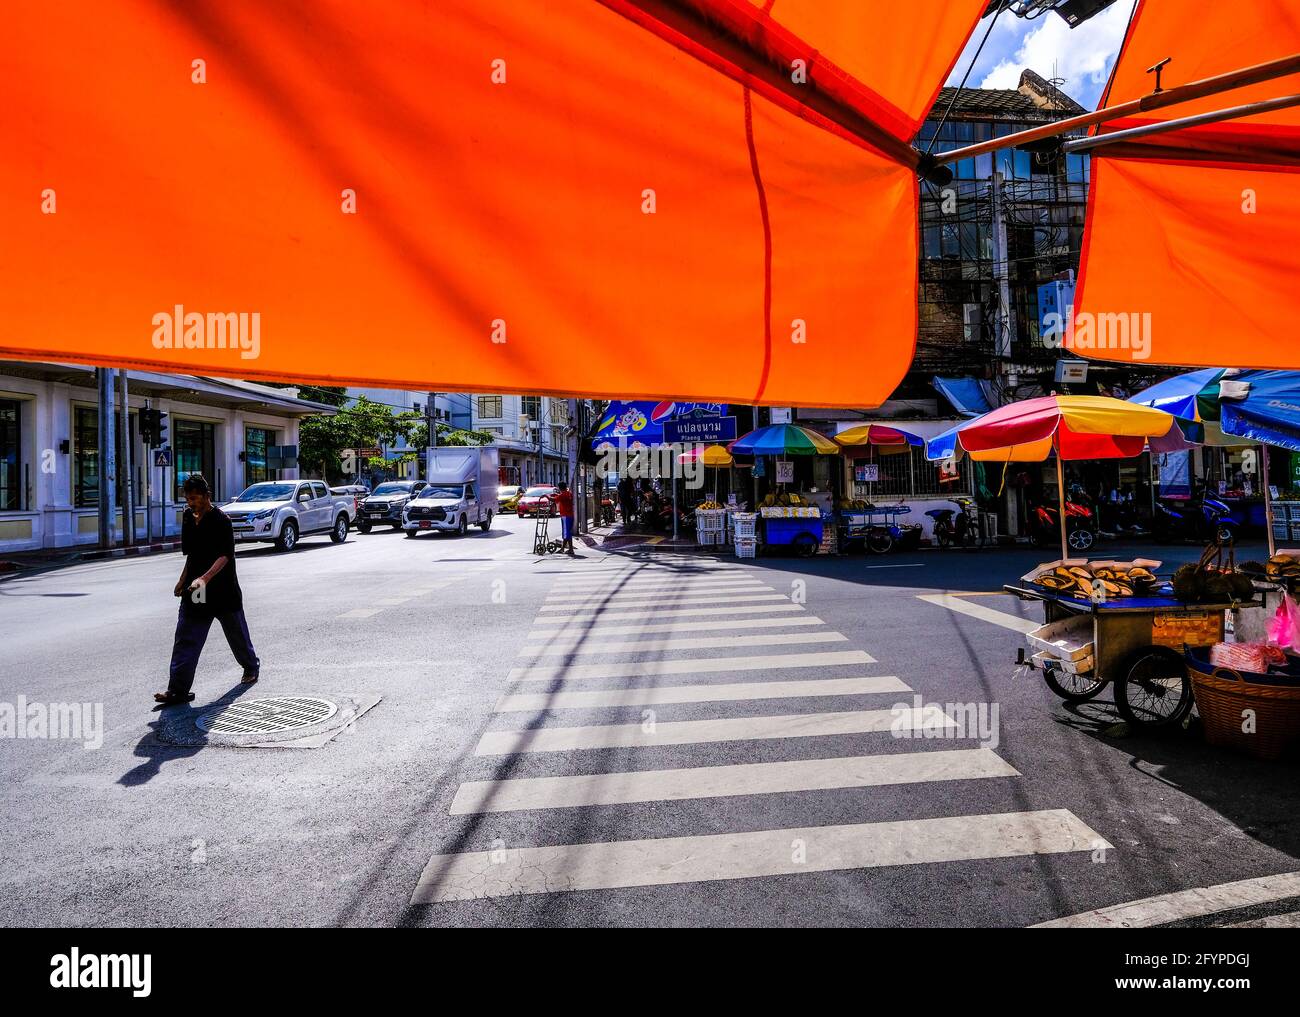 A man crosses a sunlit road against a backdrop of colorful parasols shielding various street vendors from the sun in Chinatown, Bangkok, Thailand. Stock Photo